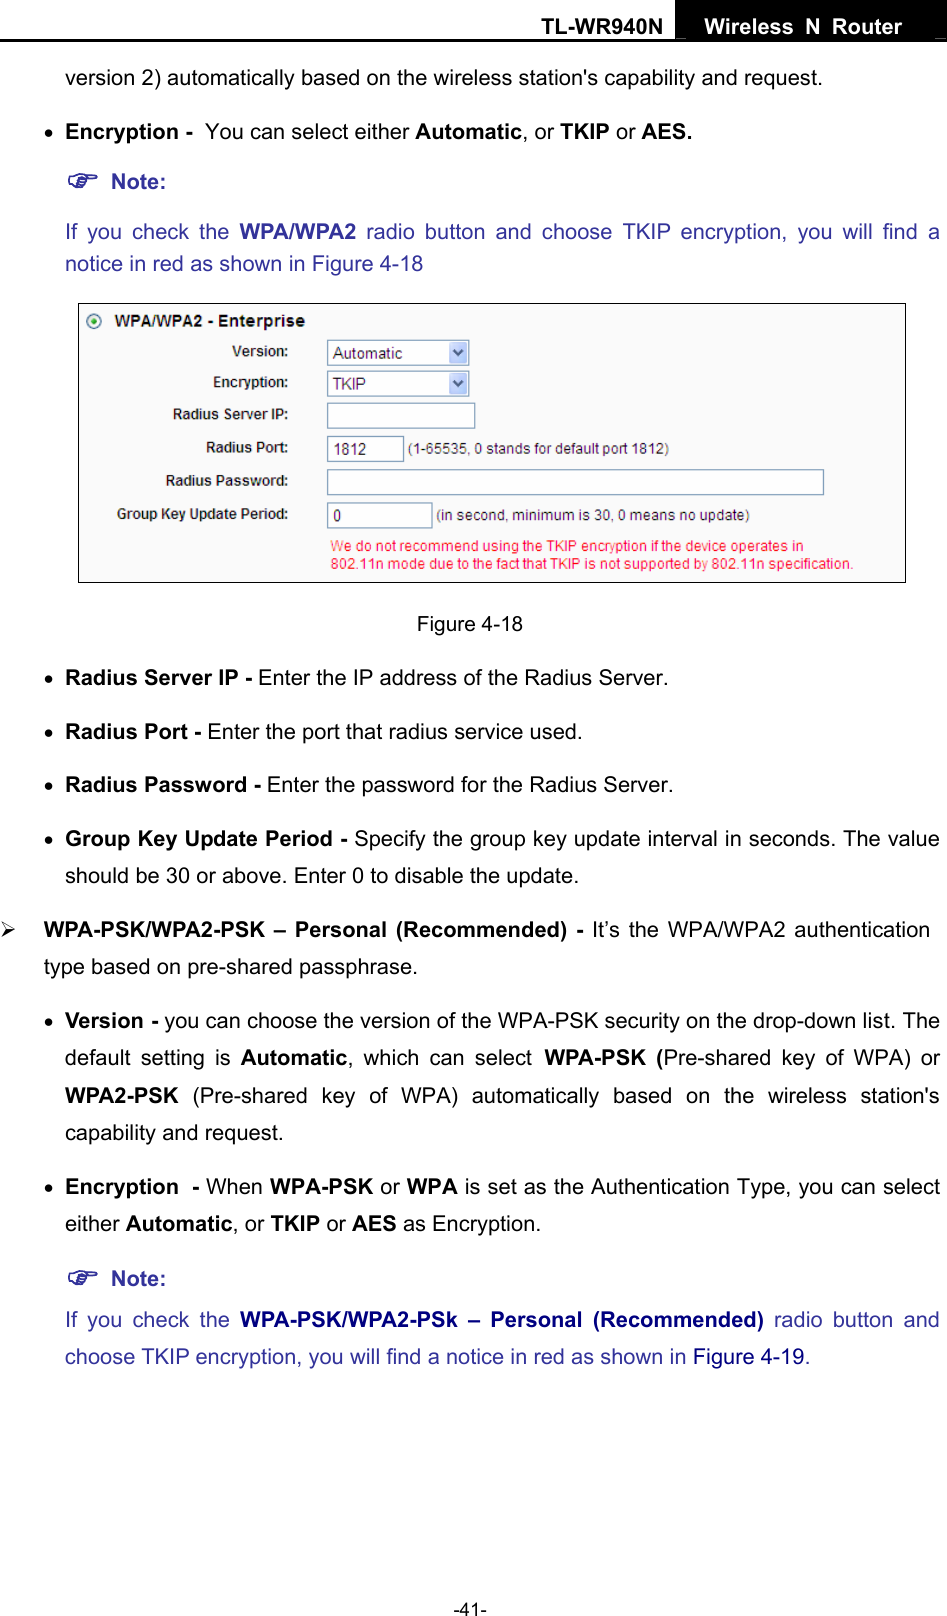 TL-WR940N  Wireless N Router   version 2) automatically based on the wireless station&apos;s capability and request. • Encryption - You can select either Automatic, or TKIP or AES. ) Note:  If you check the WPA/WPA2 radio button and choose TKIP encryption, you will find a notice in red as shown in Figure 4-18  Figure 4-18 • Radius Server IP - Enter the IP address of the Radius Server. • Radius Port - Enter the port that radius service used. • Radius Password - Enter the password for the Radius Server. • Group Key Update Period - Specify the group key update interval in seconds. The value should be 30 or above. Enter 0 to disable the update. ¾ WPA-PSK/WPA2-PSK – Personal (Recommended) - It’s the WPA/WPA2 authentication type based on pre-shared passphrase.   • Version - you can choose the version of the WPA-PSK security on the drop-down list. The default setting is Automatic, which can select WPA-PSK (Pre-shared key of WPA) or WPA2-PSK  (Pre-shared key of WPA) automatically based on the wireless station&apos;s capability and request. • Encryption - When WPA-PSK or WPA is set as the Authentication Type, you can select either Automatic, or TKIP or AES as Encryption. ) Note:  If you check the WPA-PSK/WPA2-PSk – Personal (Recommended) radio button and choose TKIP encryption, you will find a notice in red as shown in Figure 4-19. -41- 